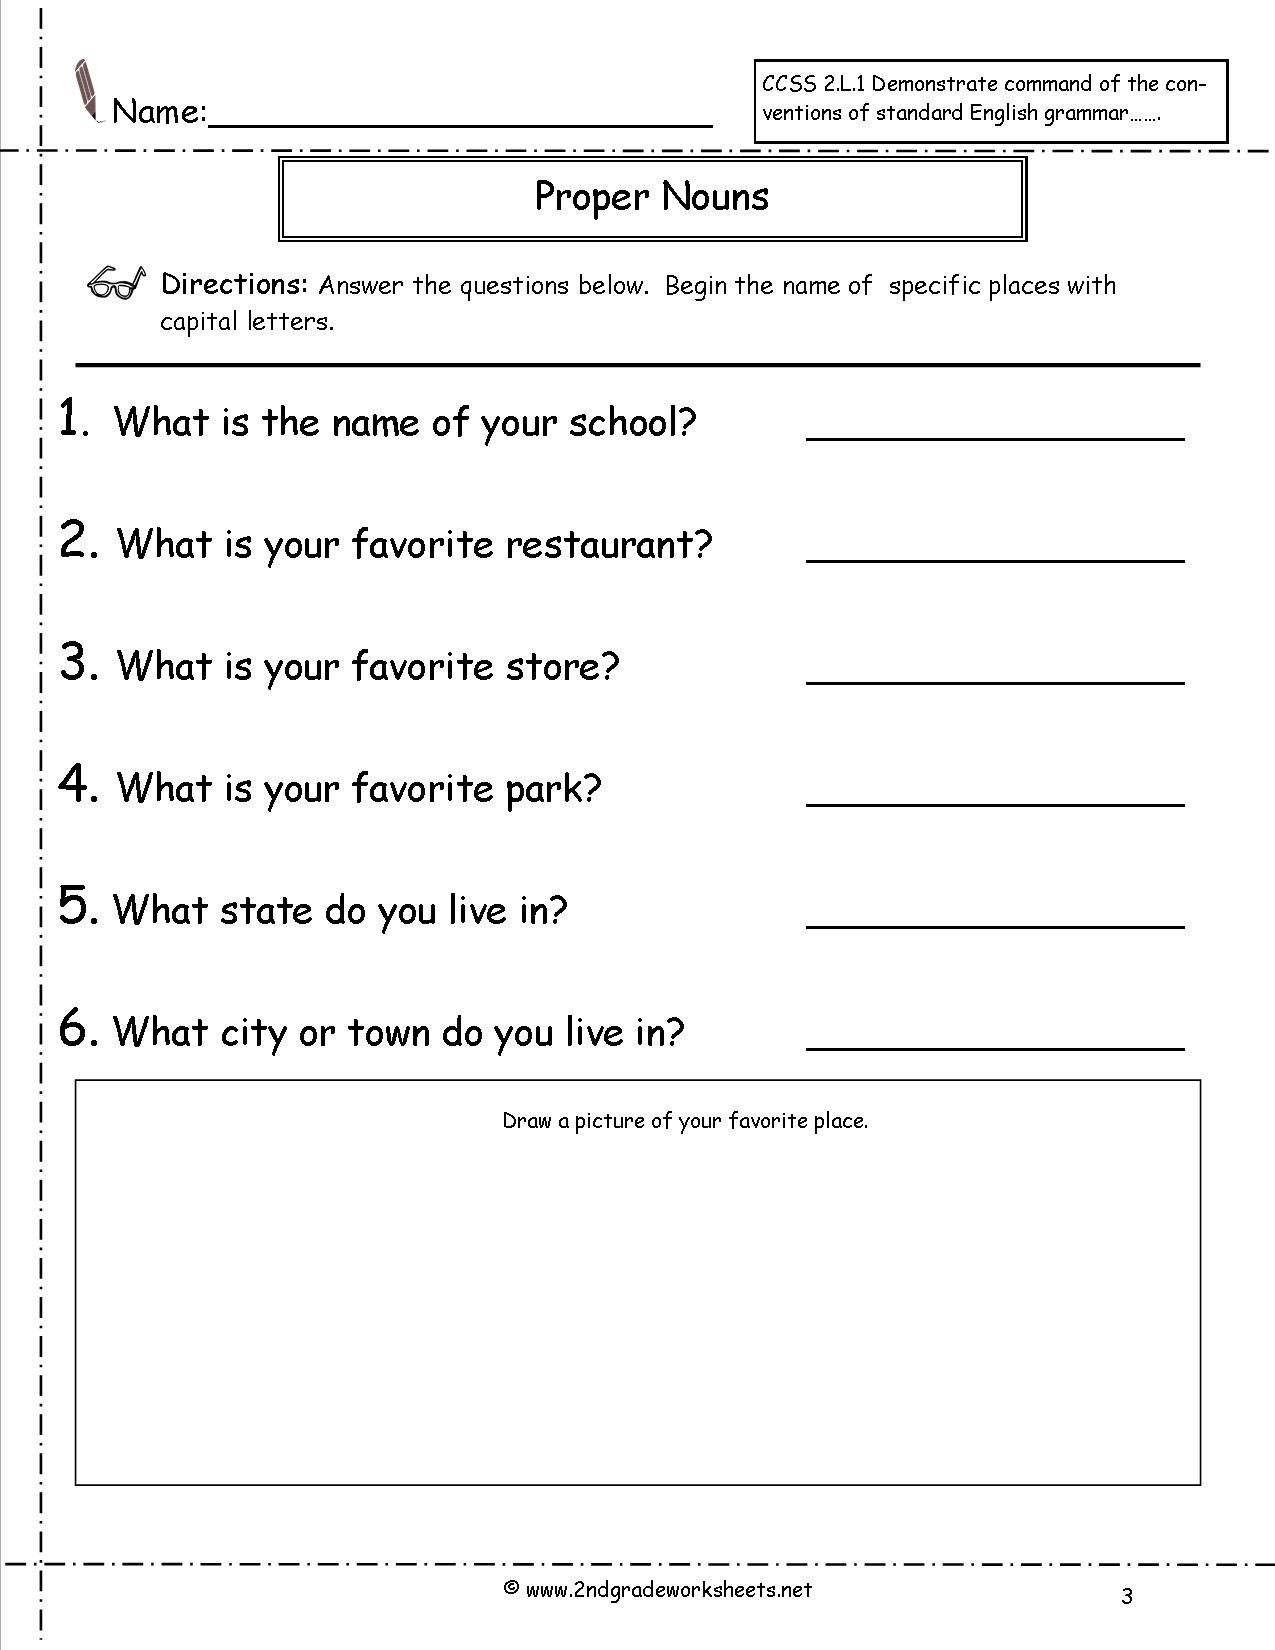 Common And Proper Noun Worksheet The Best Worksheets Image